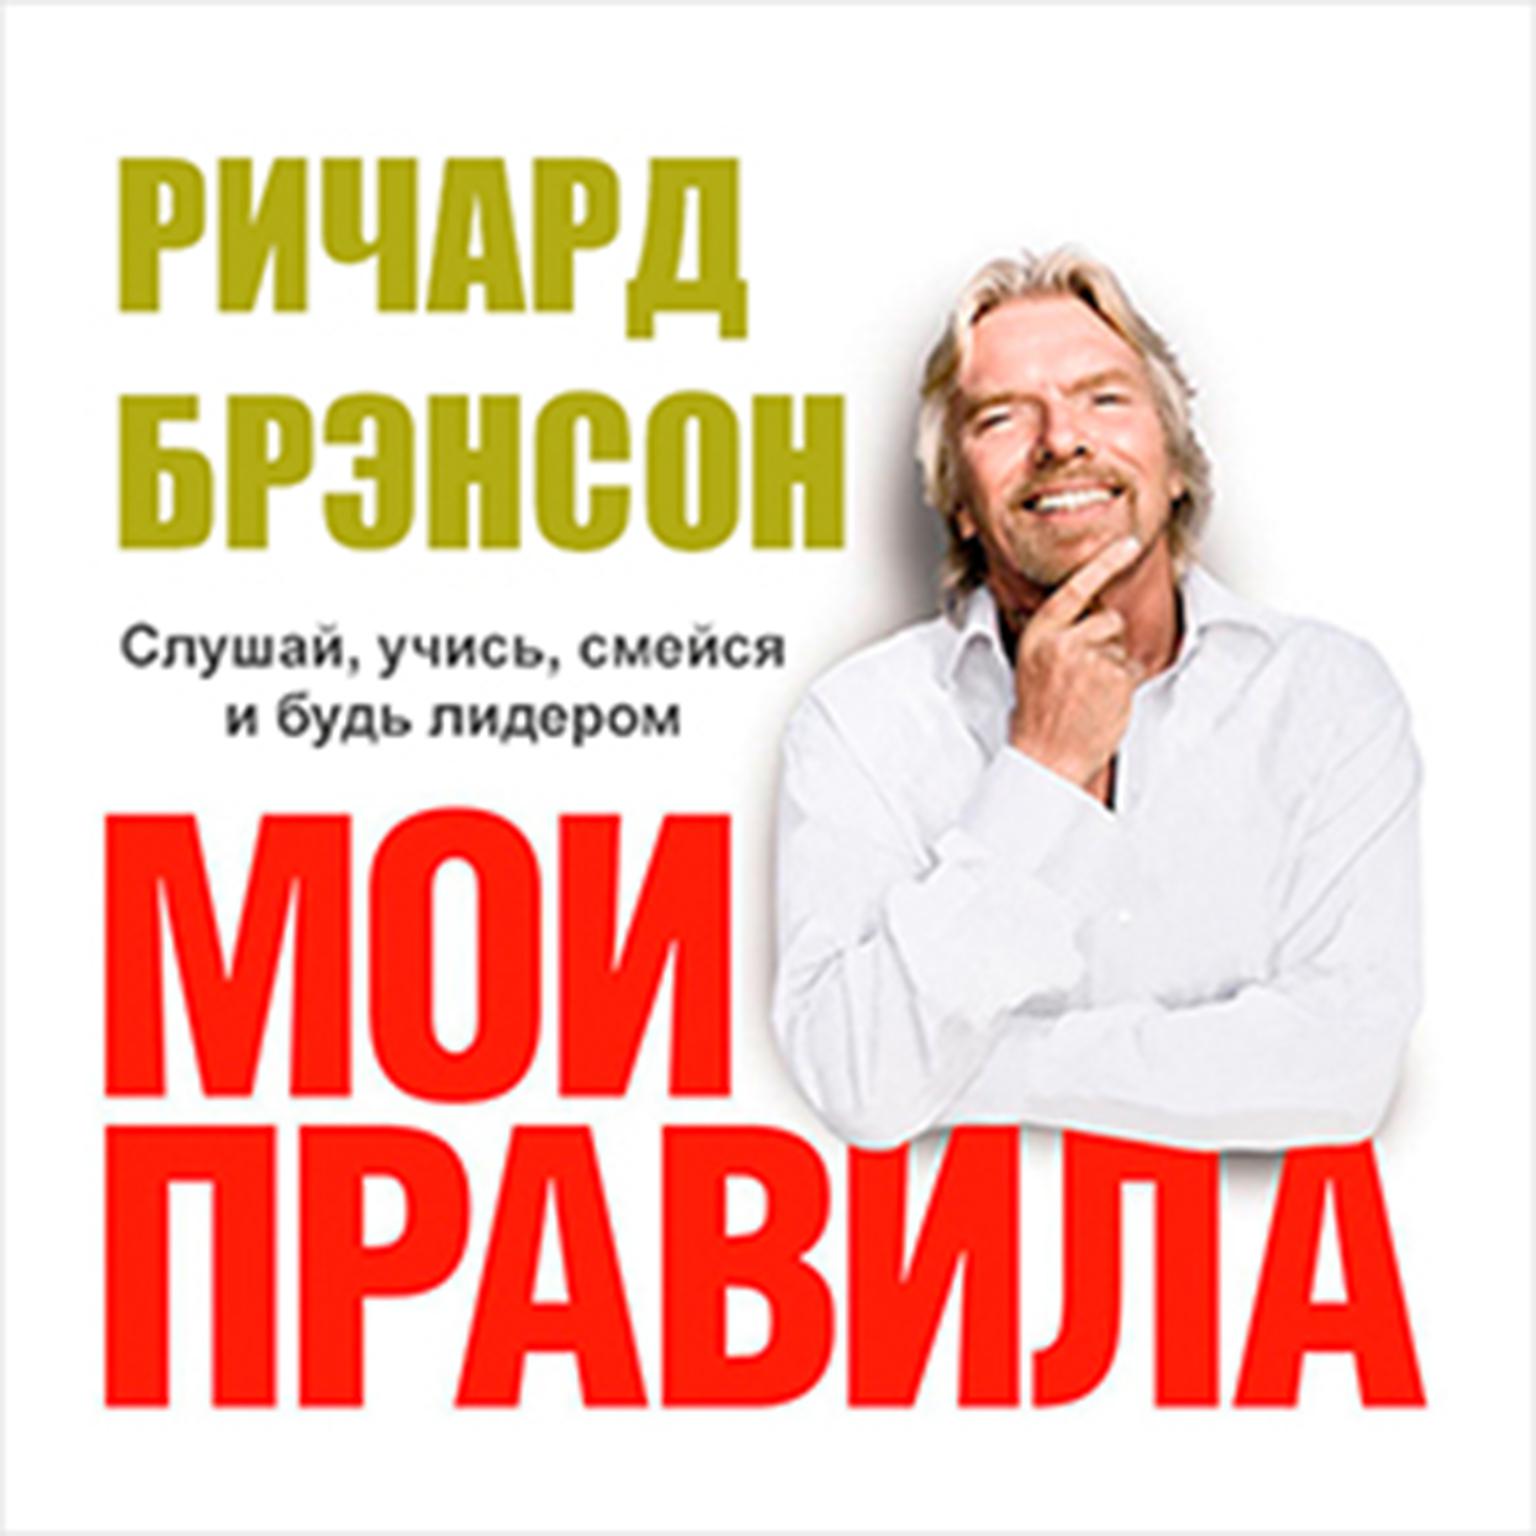 The Virgin Way: How to Listen, Learn, Laugh and Lead [Russian Edition] Audiobook, by Richard Branson